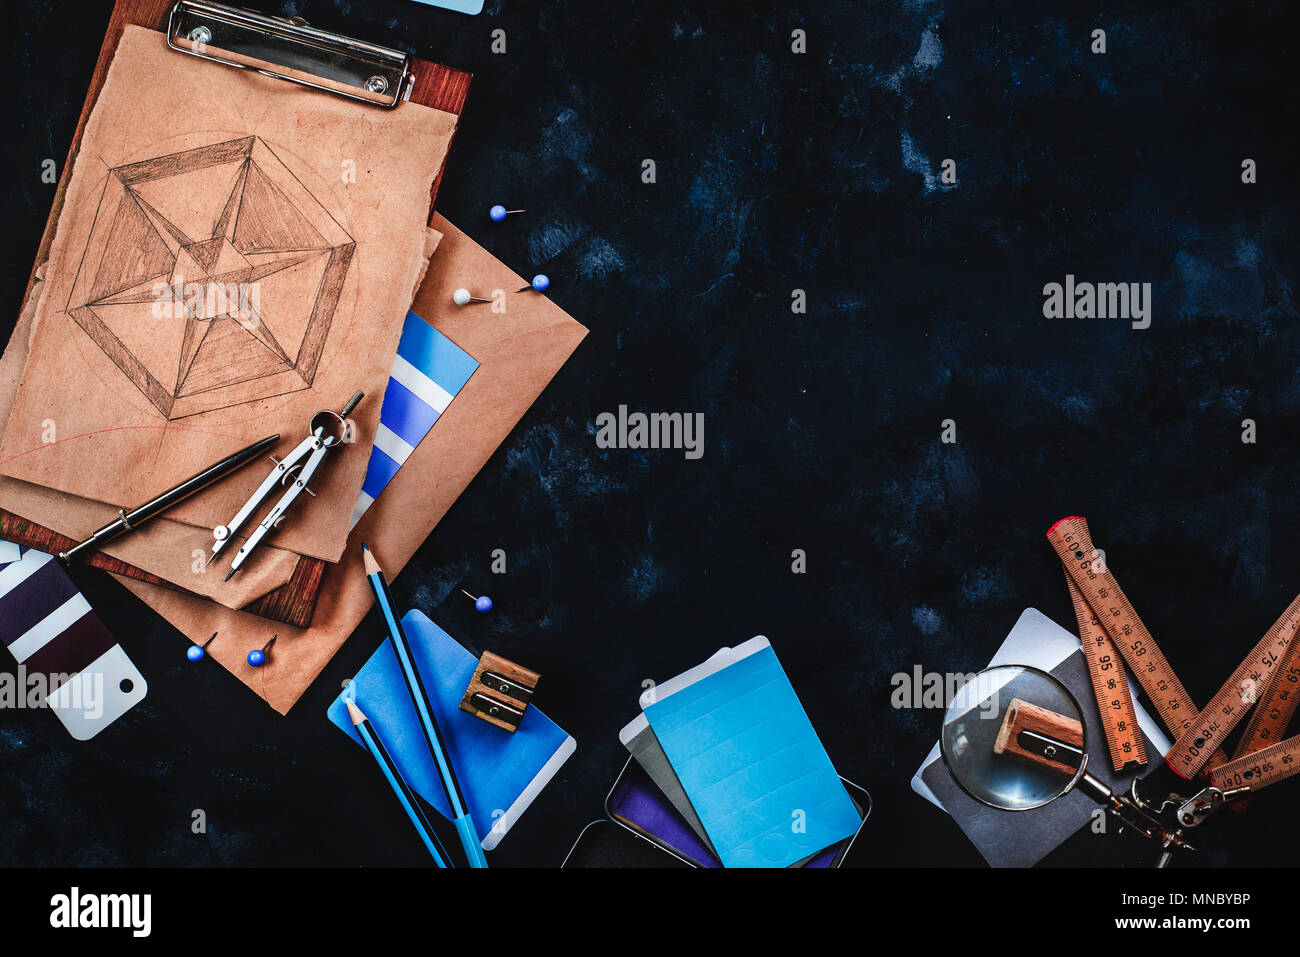 Header with draftsman or designer workplace with craft paper, sketches, compasses, rulers, clipboards and pencils on a dark stone background. Top view Stock Photo